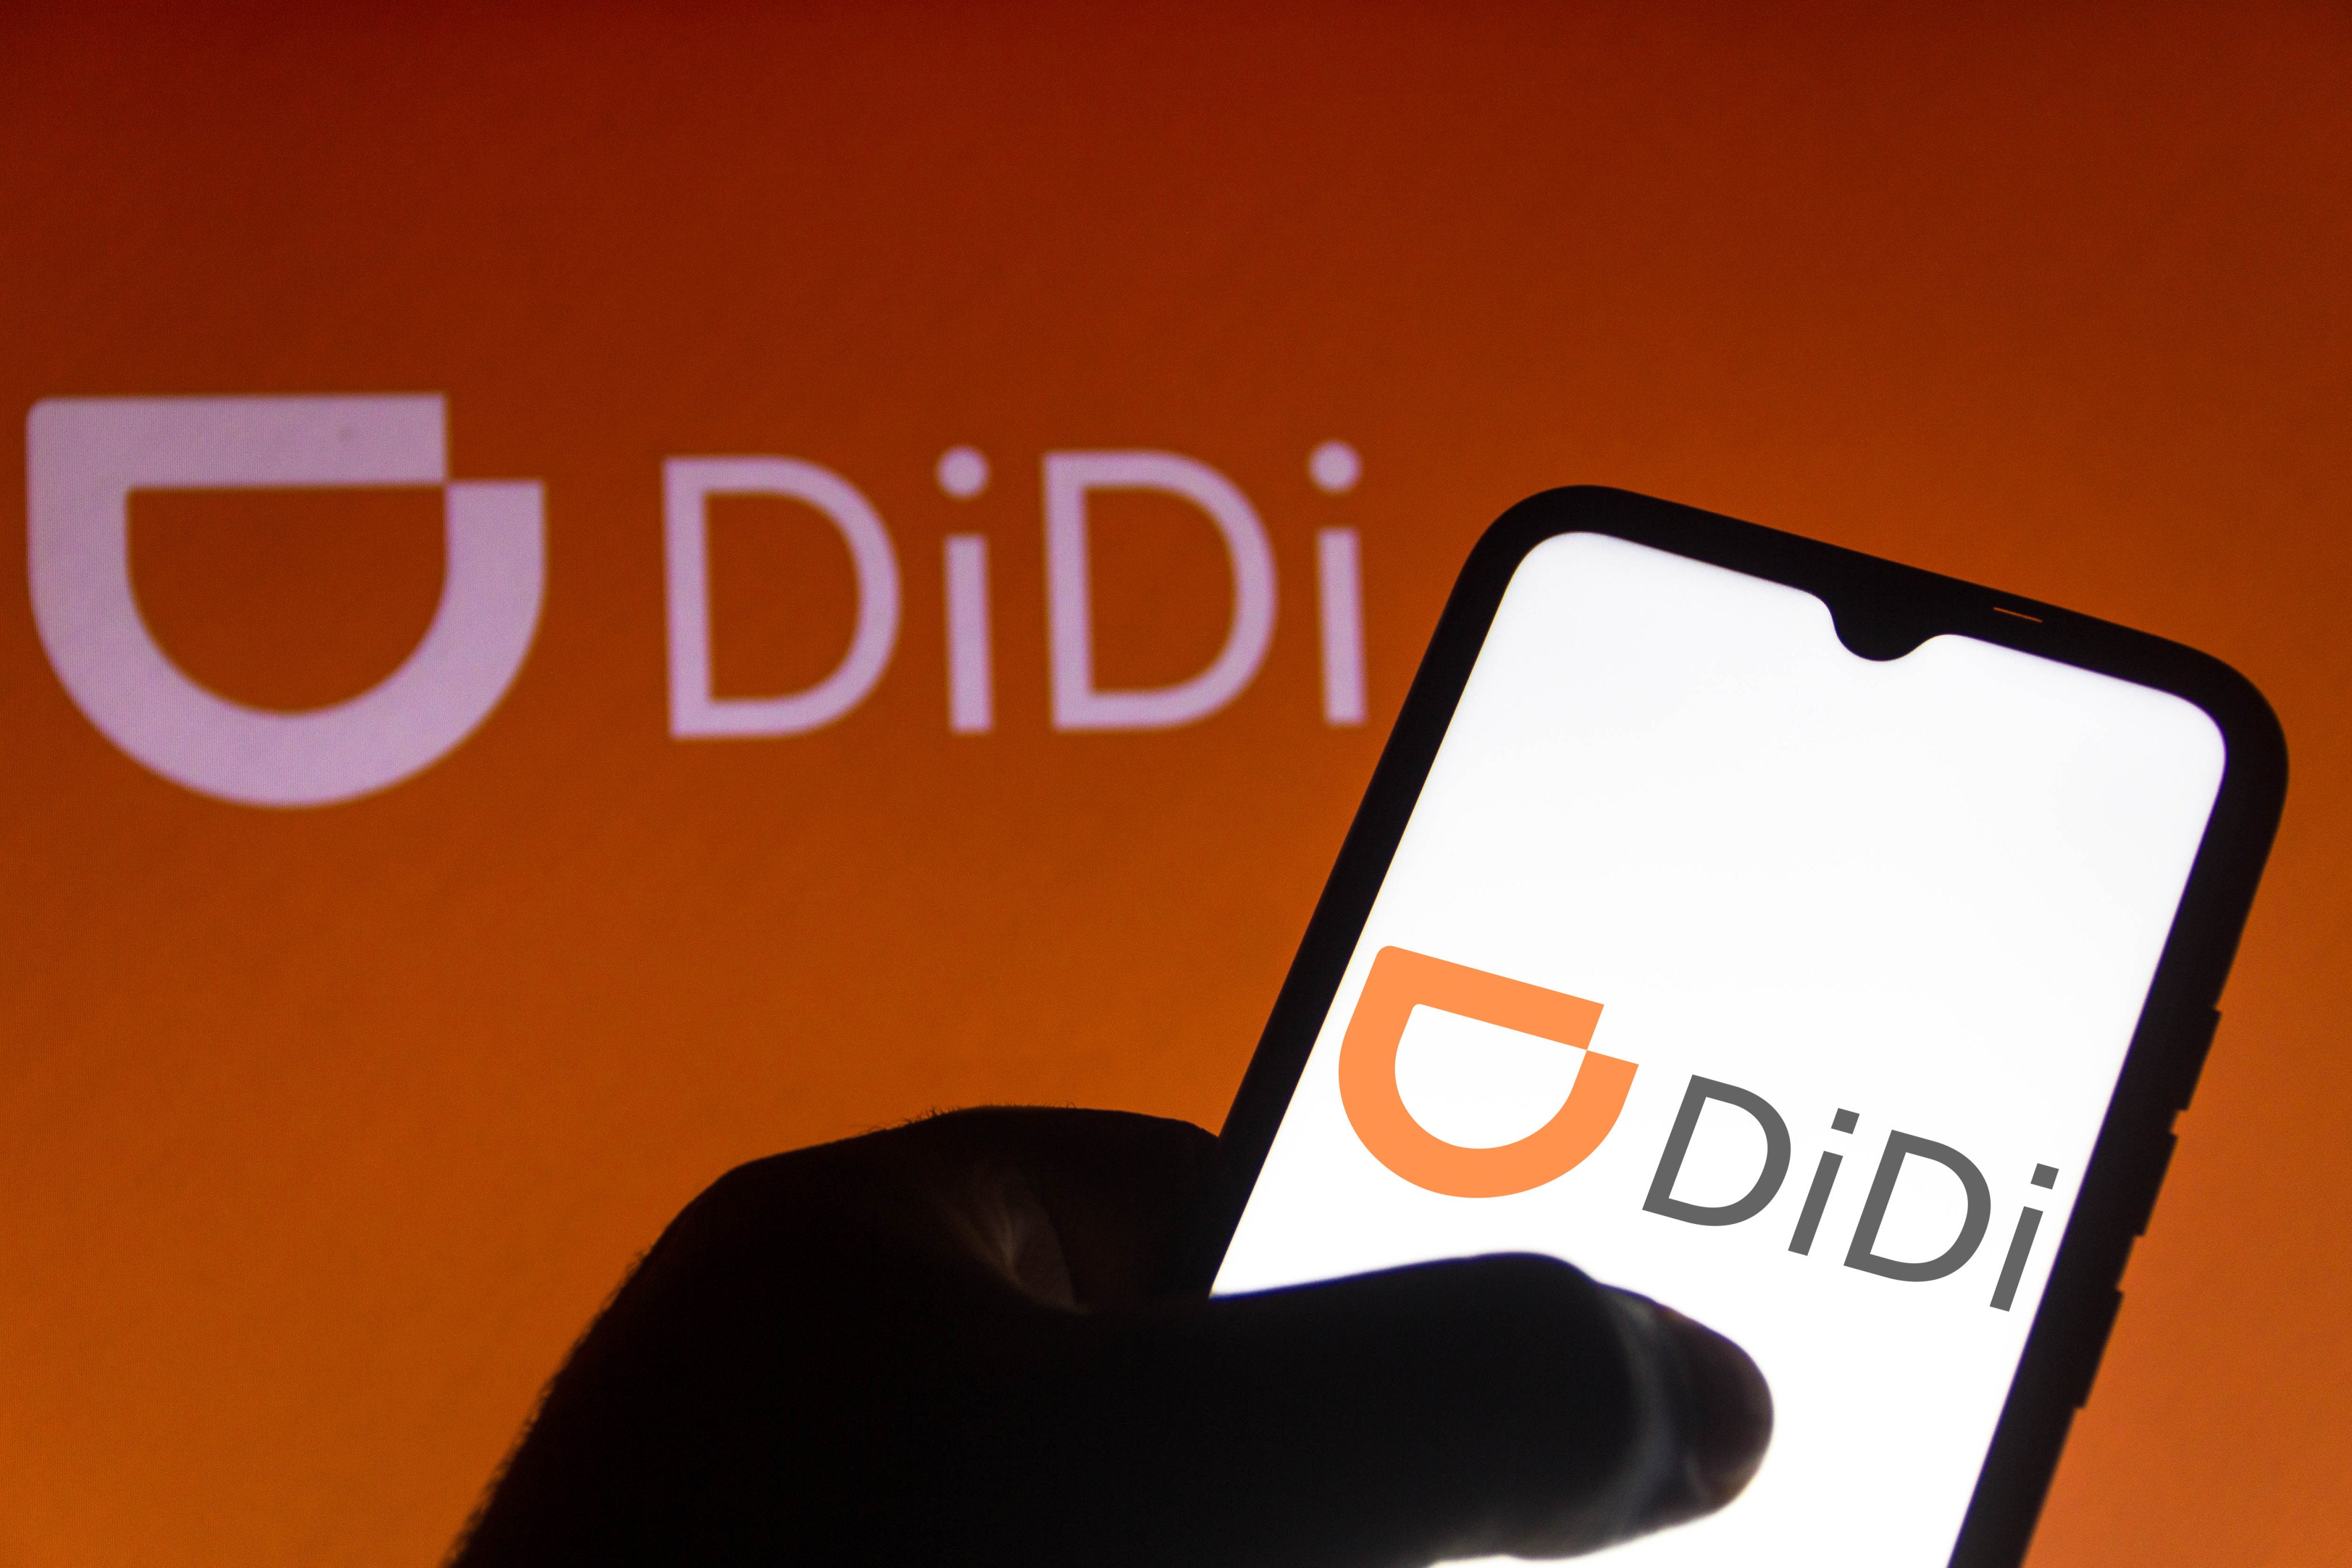 Didi Chuxing’s latest job cuts show that restructuring is still under way at China’s Big Tech companies. Photo: Shutterstock